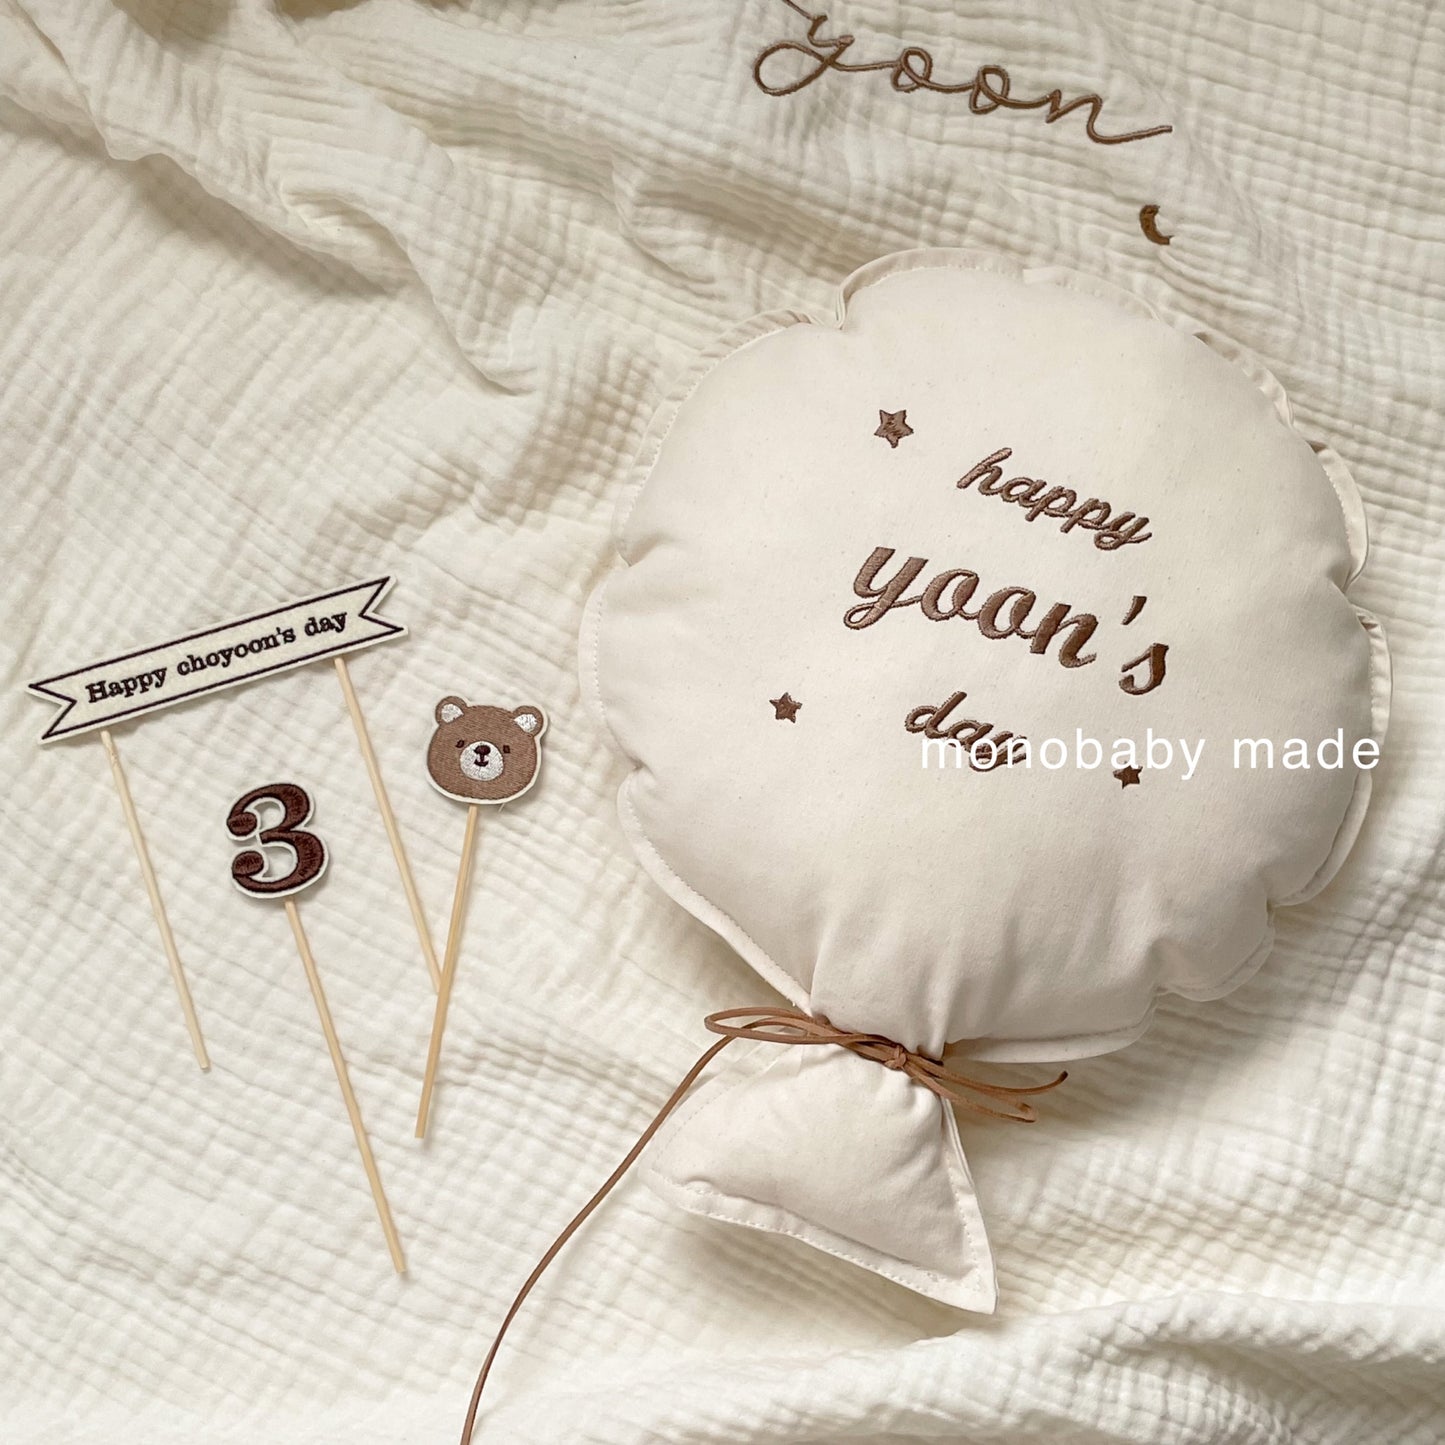 Baby Pillow in Balloon Shape with Pesonalized Embroidery Monogram